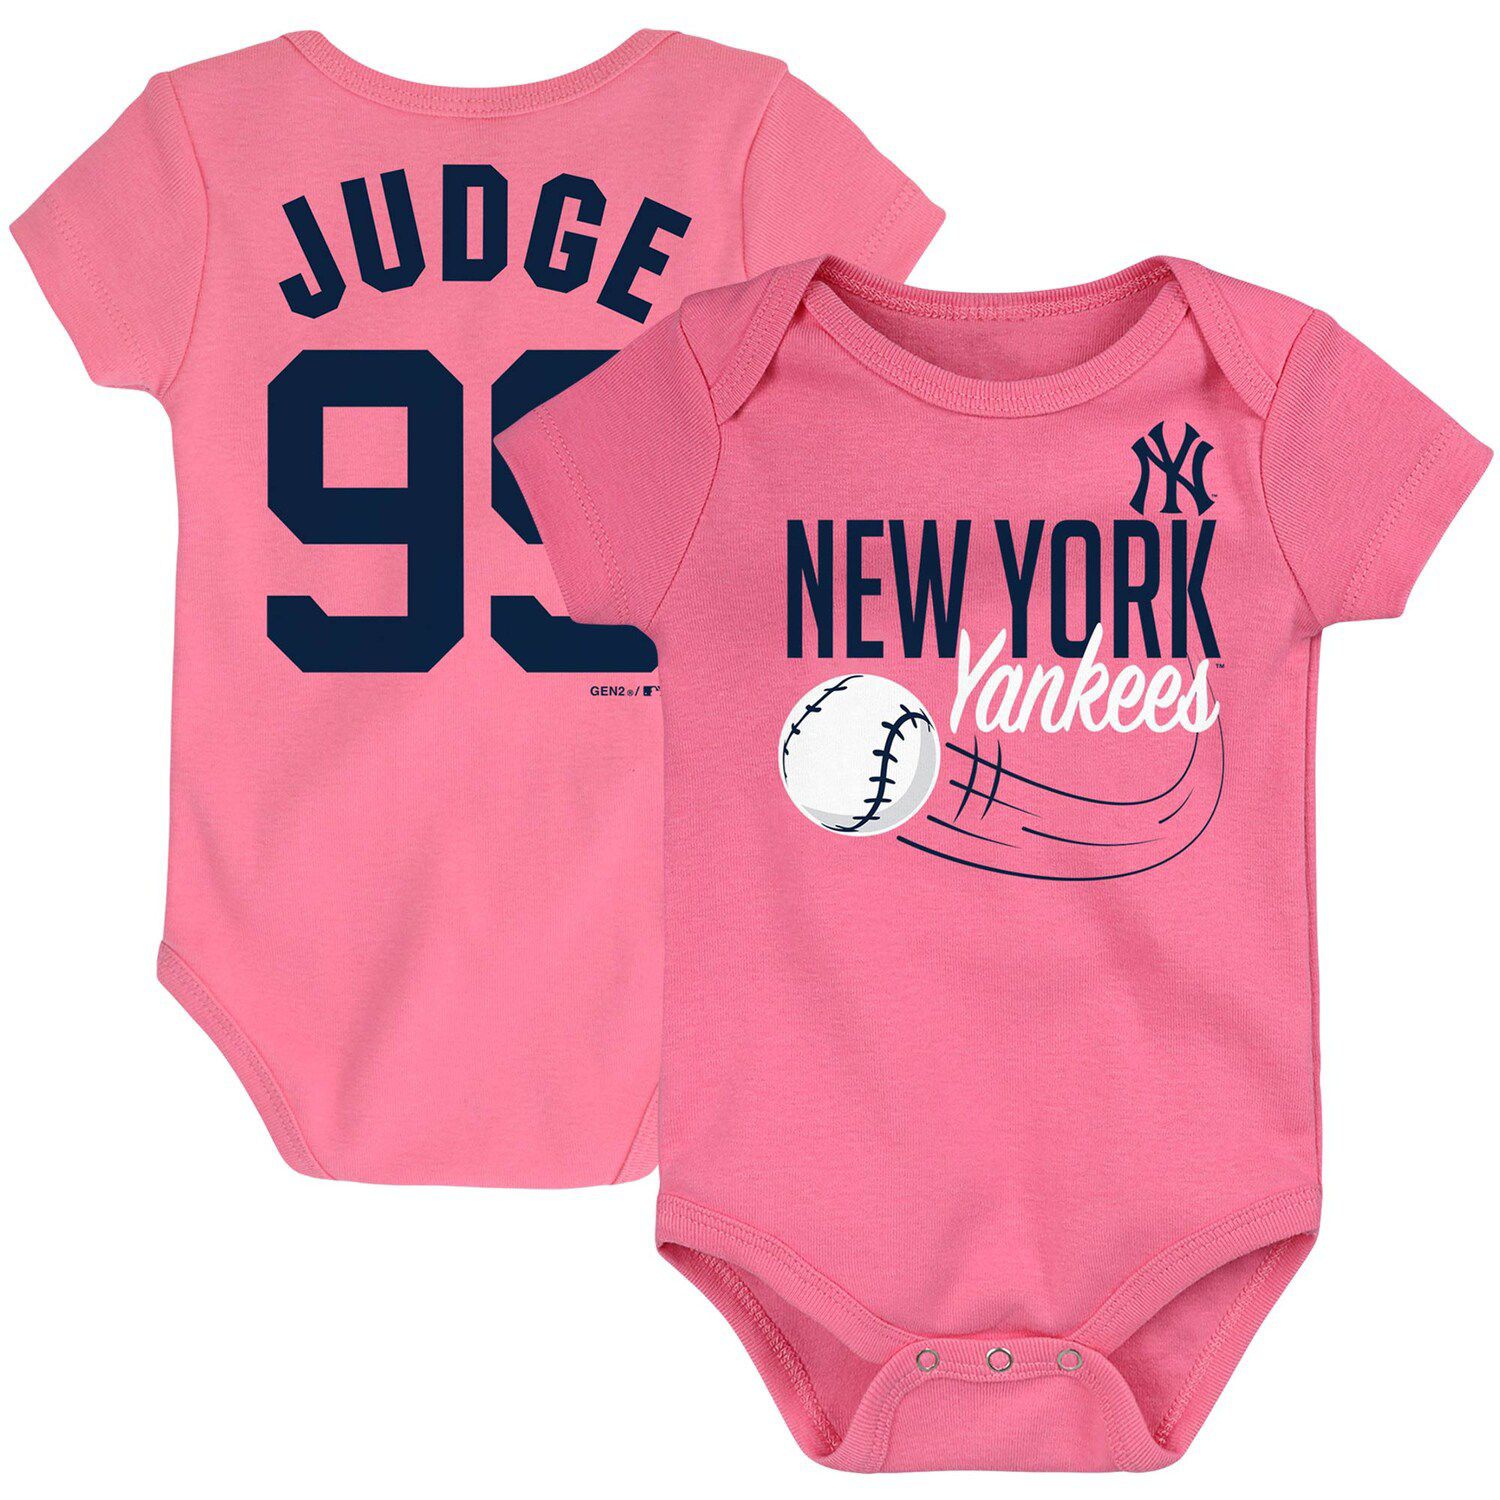 yankees baby clothes girl